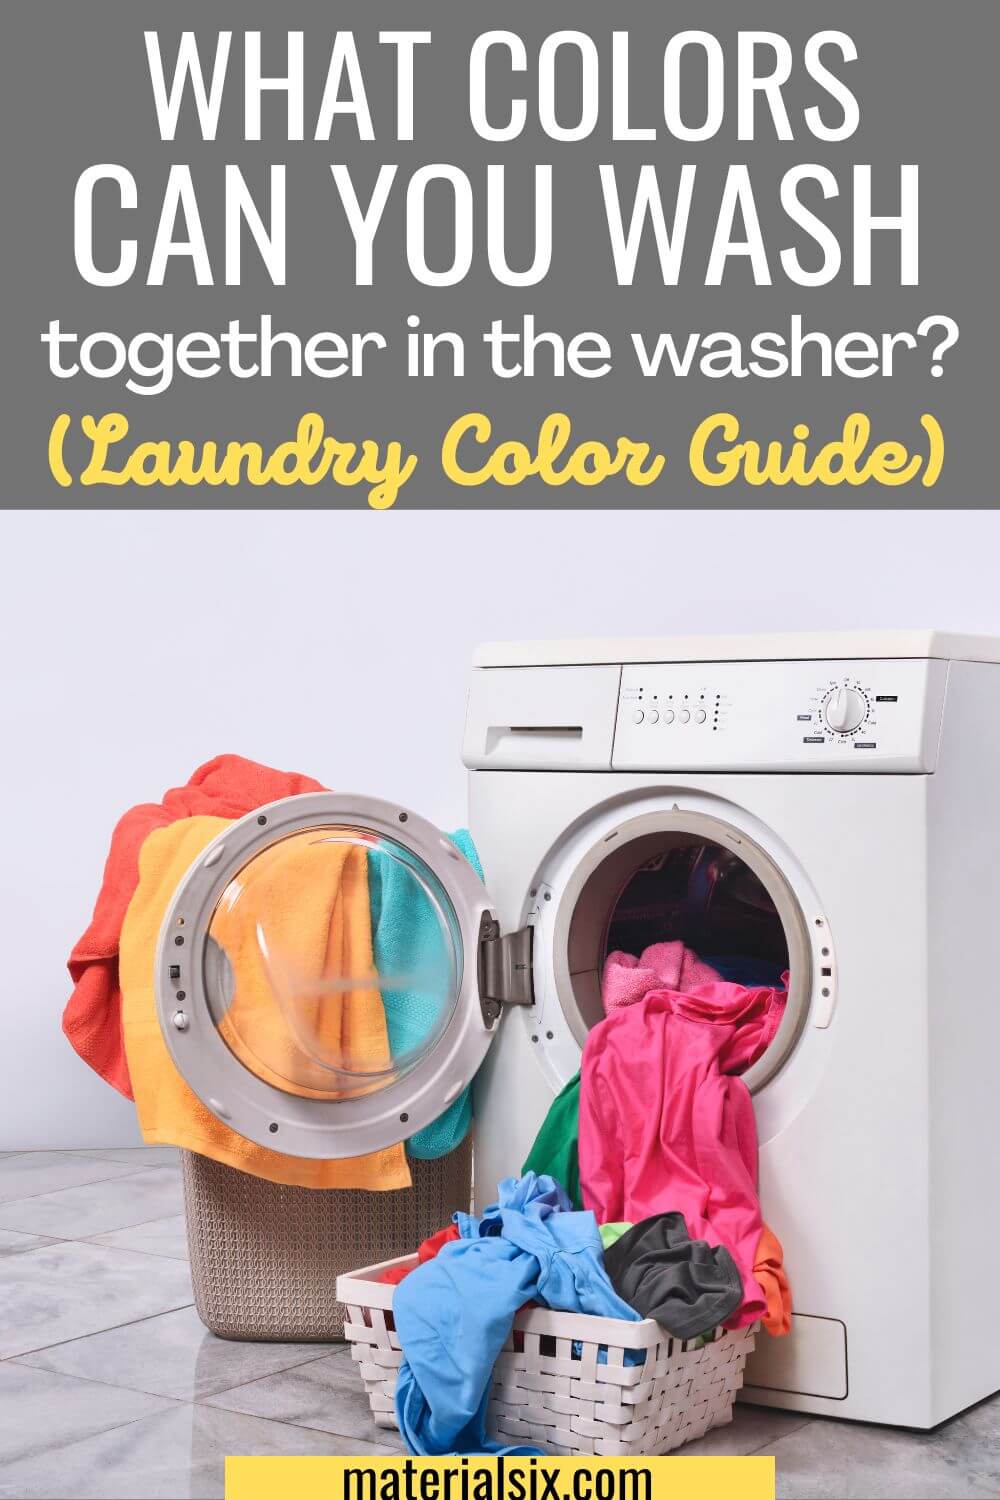 What Colors Can You Wash Together (Laundry Color Guide) (2)